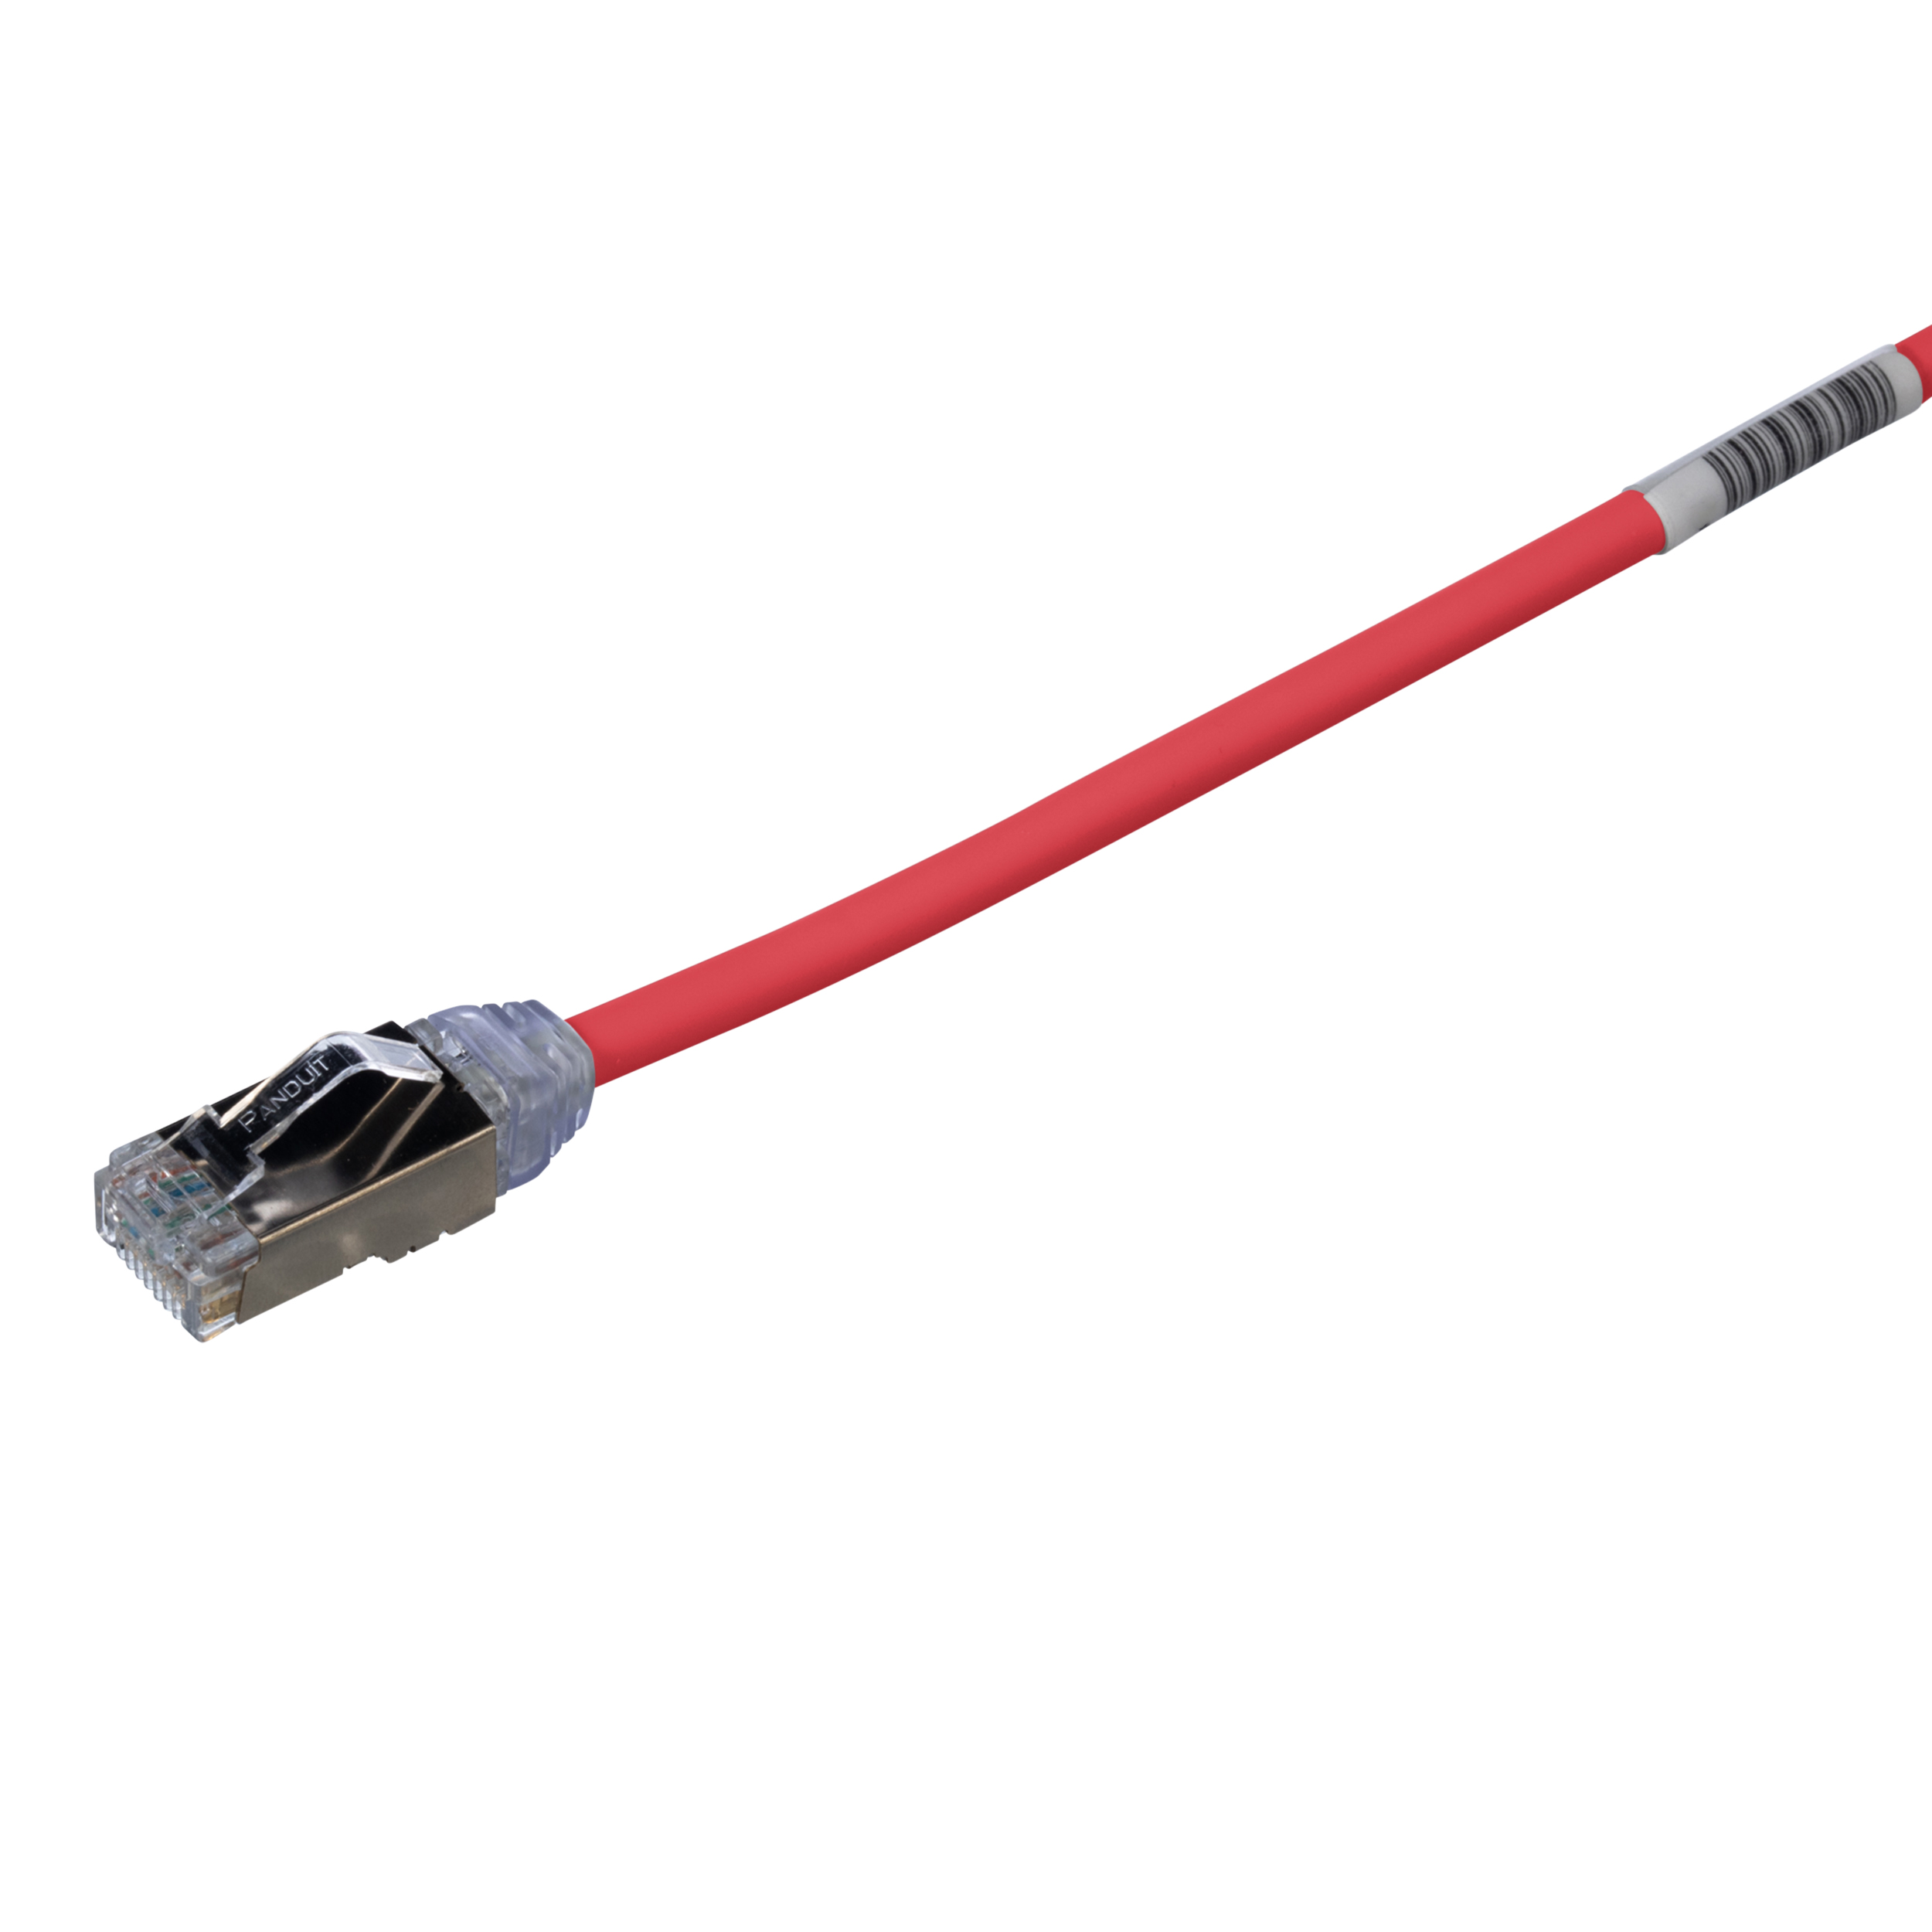 Cat 6A 28 AWG Shielded Patch Cord, 5 m, Red